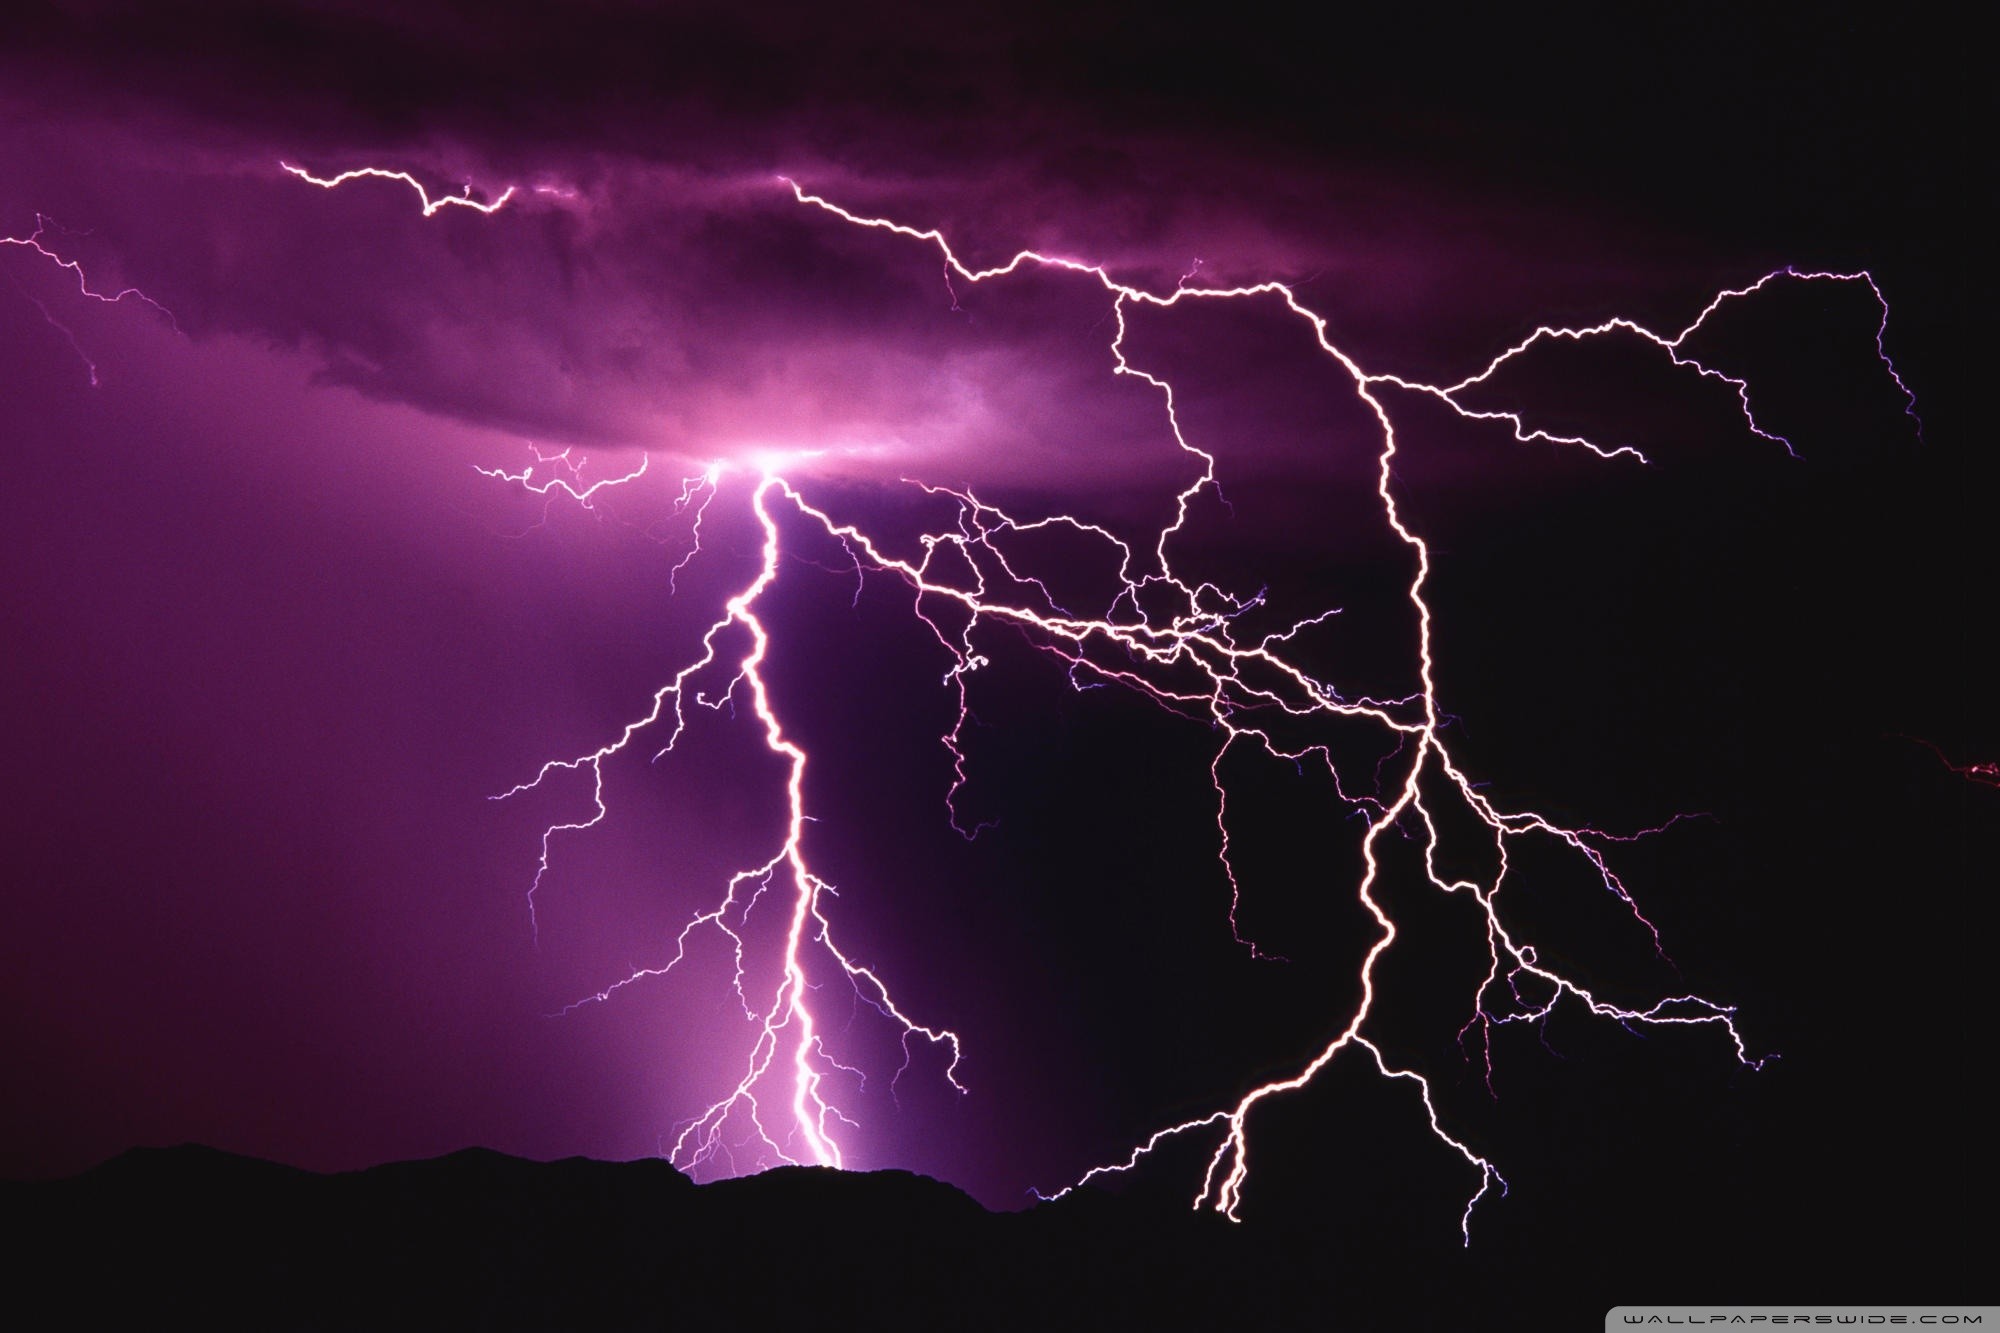 Download Storm wallpaper by tott78 now Browse millions of popular blue  wallpapers and ringto  Lightning photography Beautiful nature wallpaper  Lightning photos